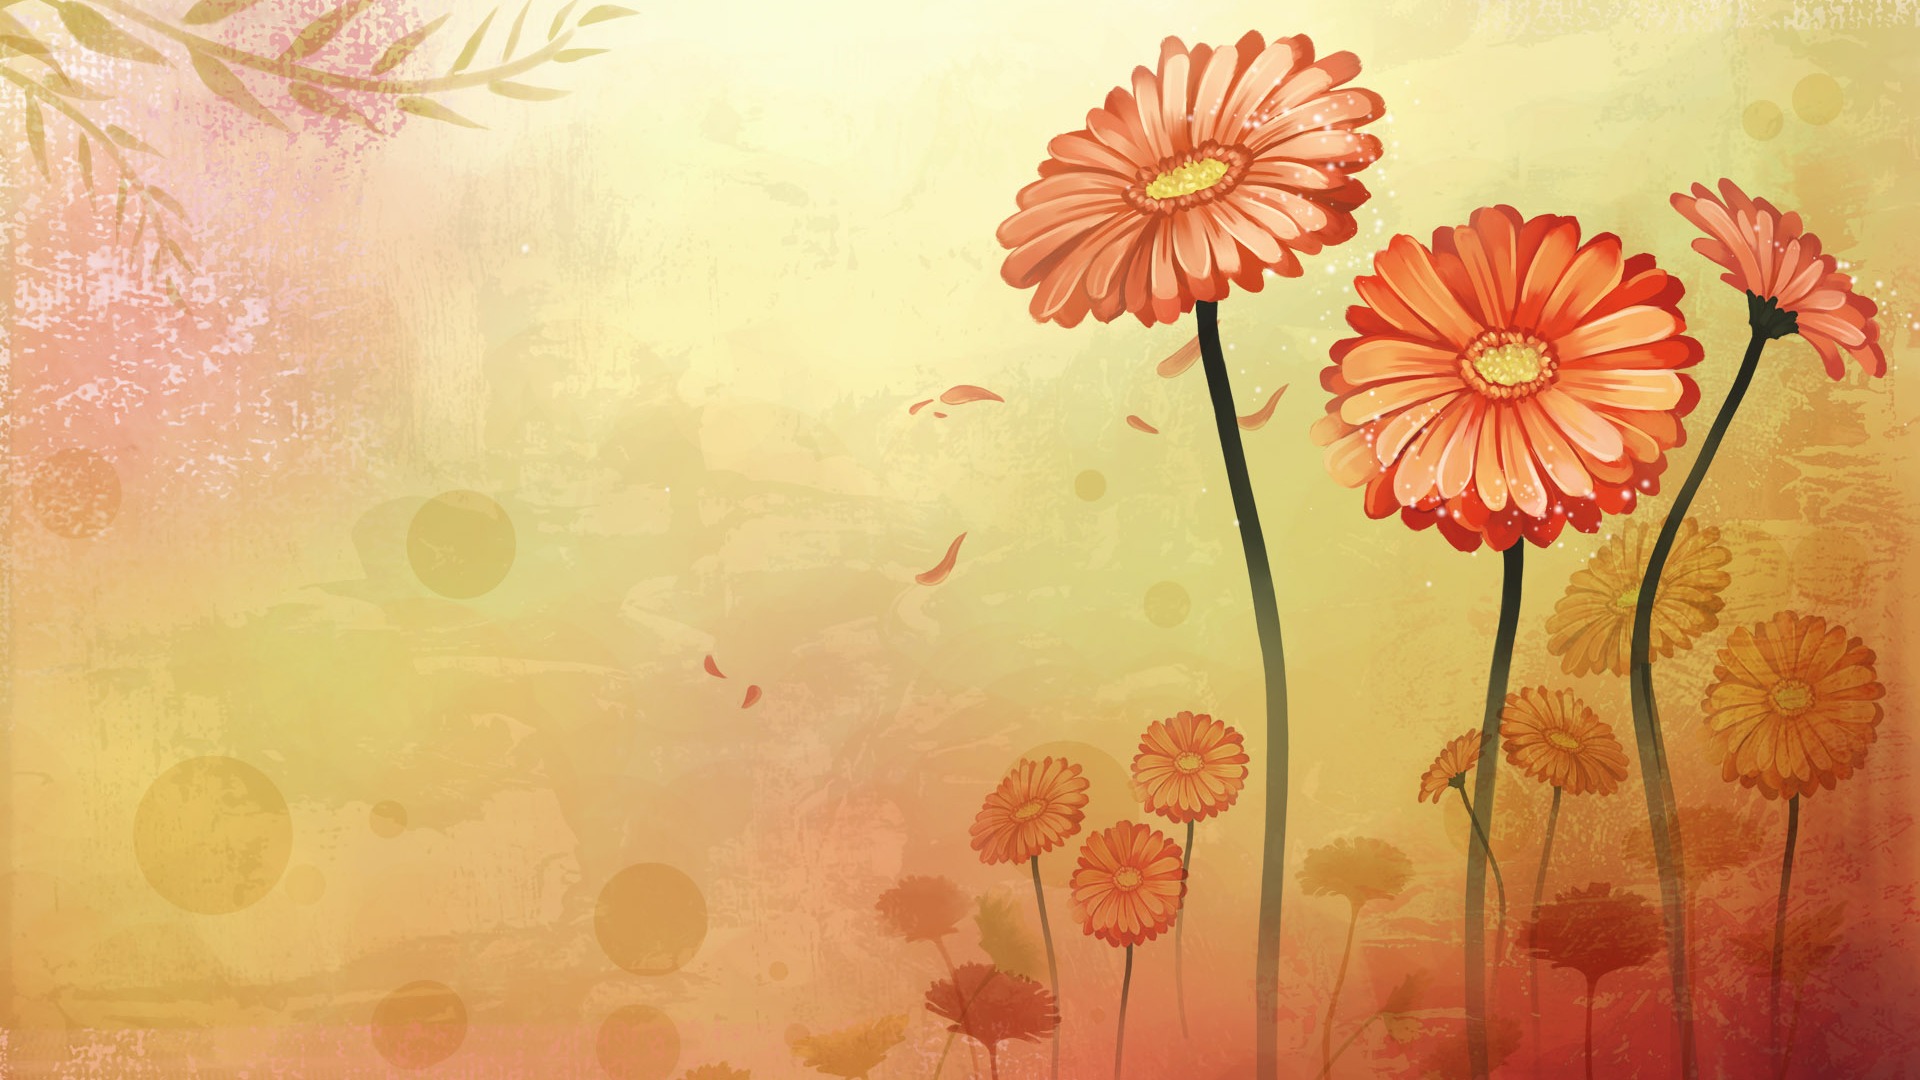 Synthetic Wallpaper Colorful Flower #28 - 1920x1080